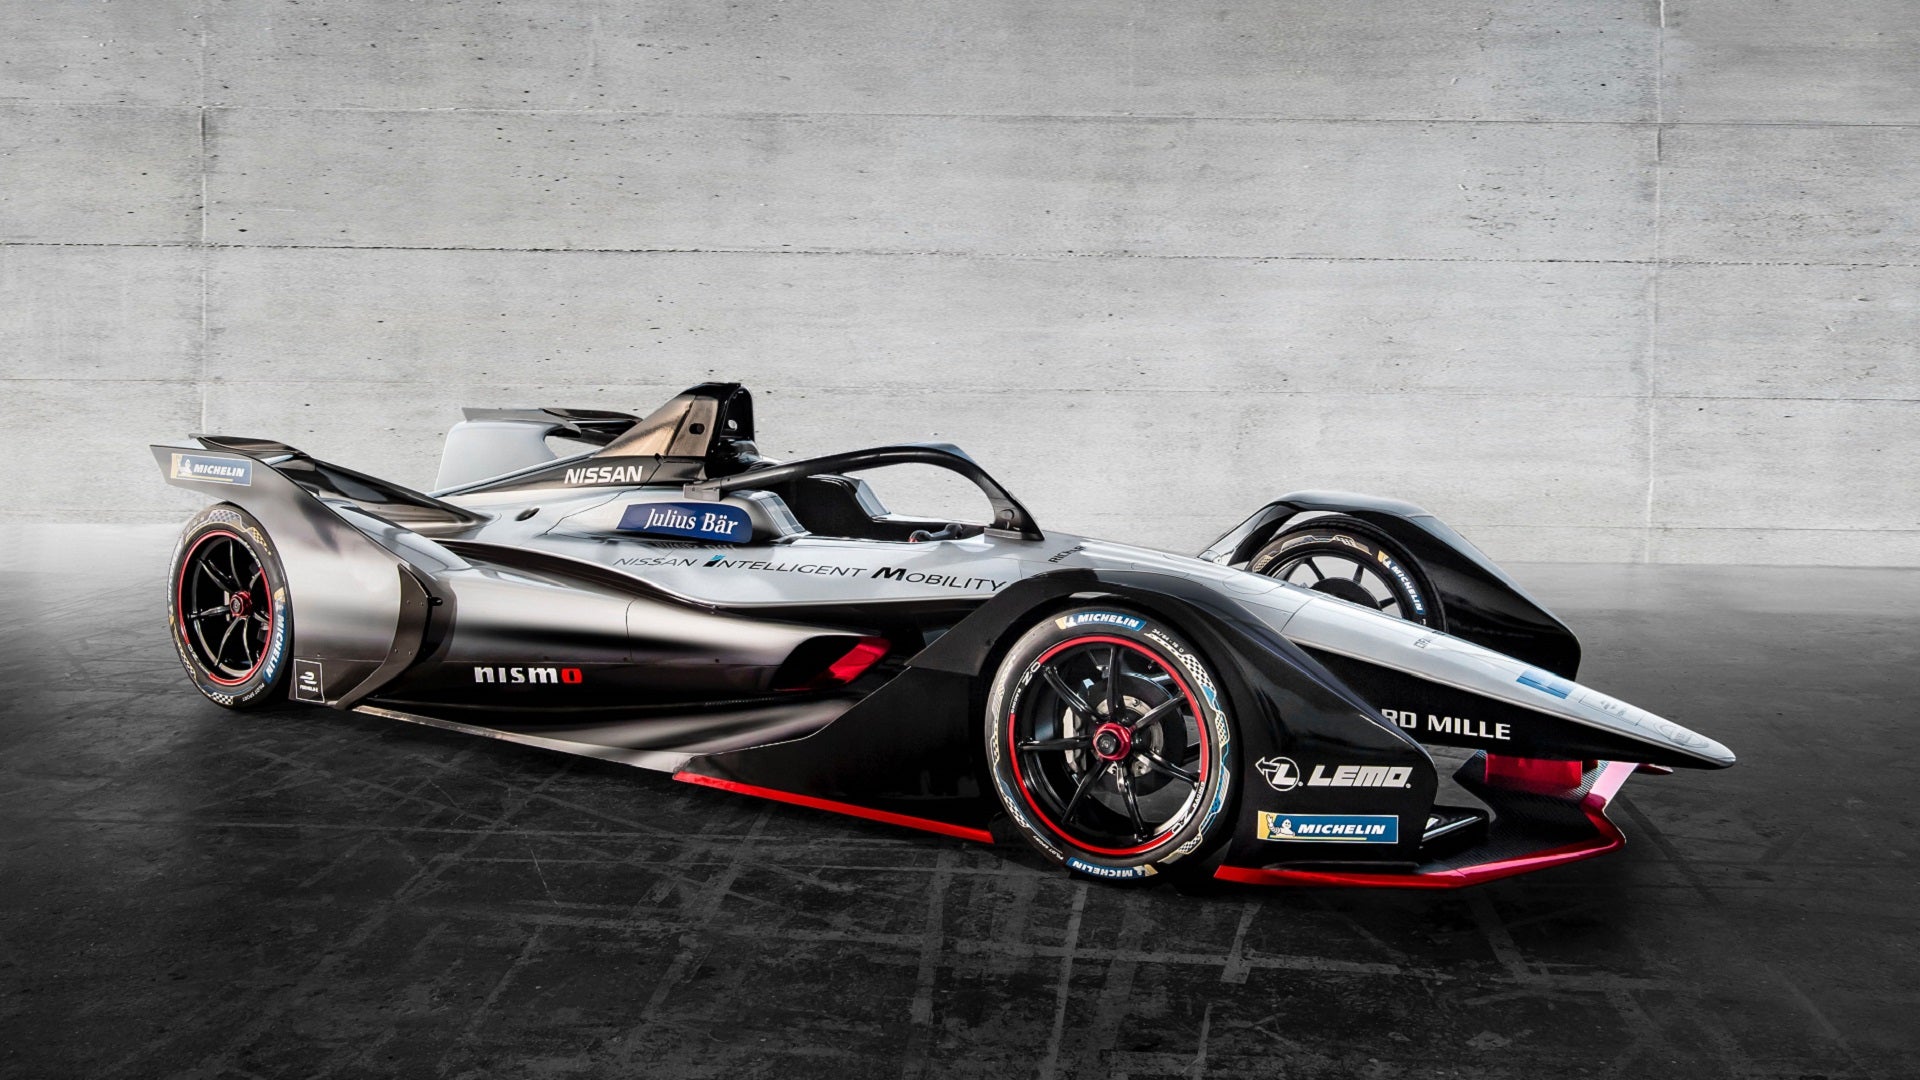 Nissan's New Formula E Racer Is the Sexiest Nissan Ever Created